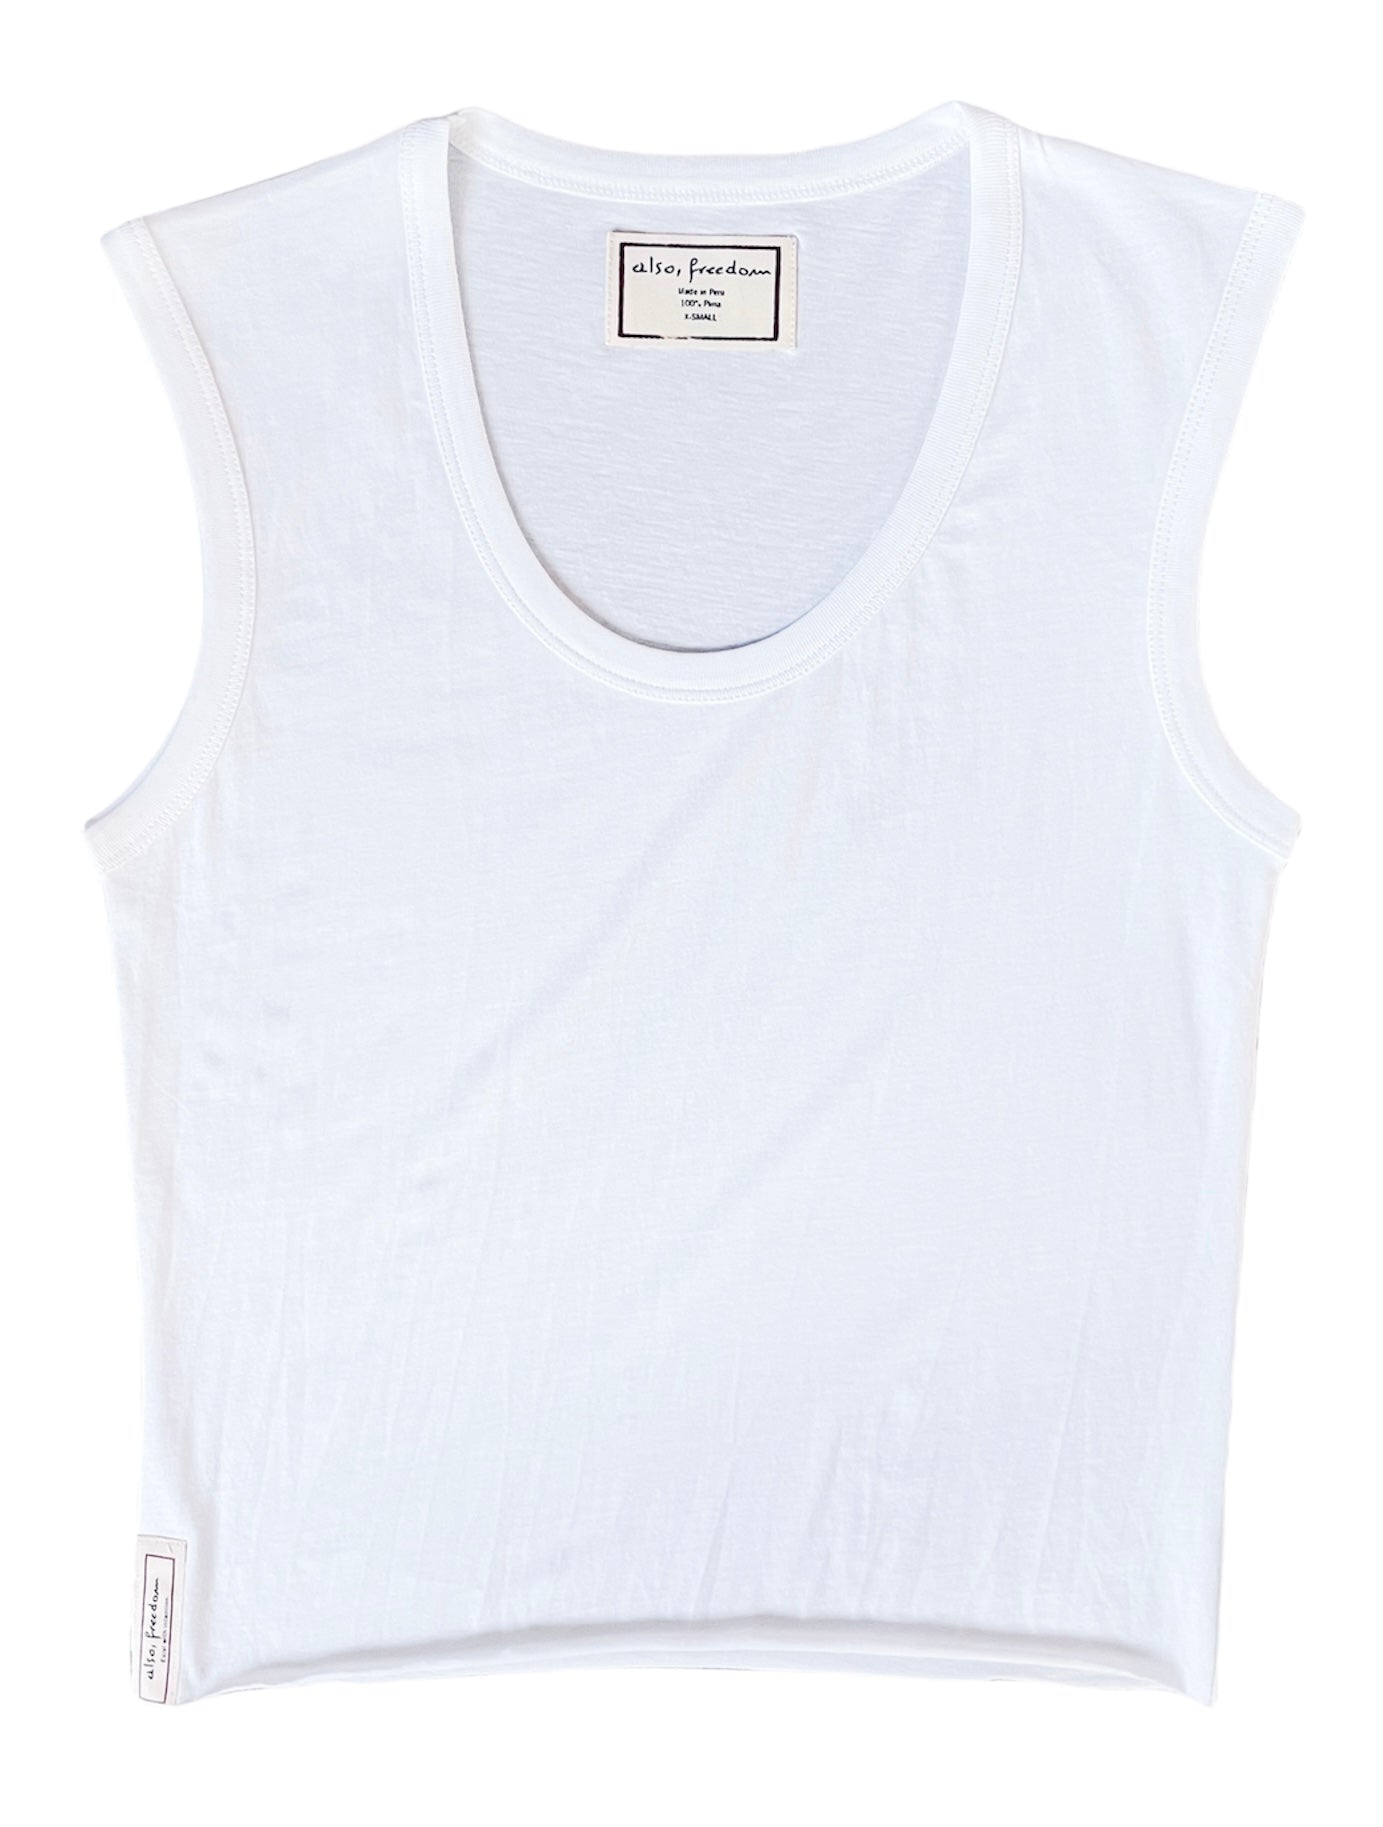 The Purist, Scoop Muscle Tank - Also, Freedom